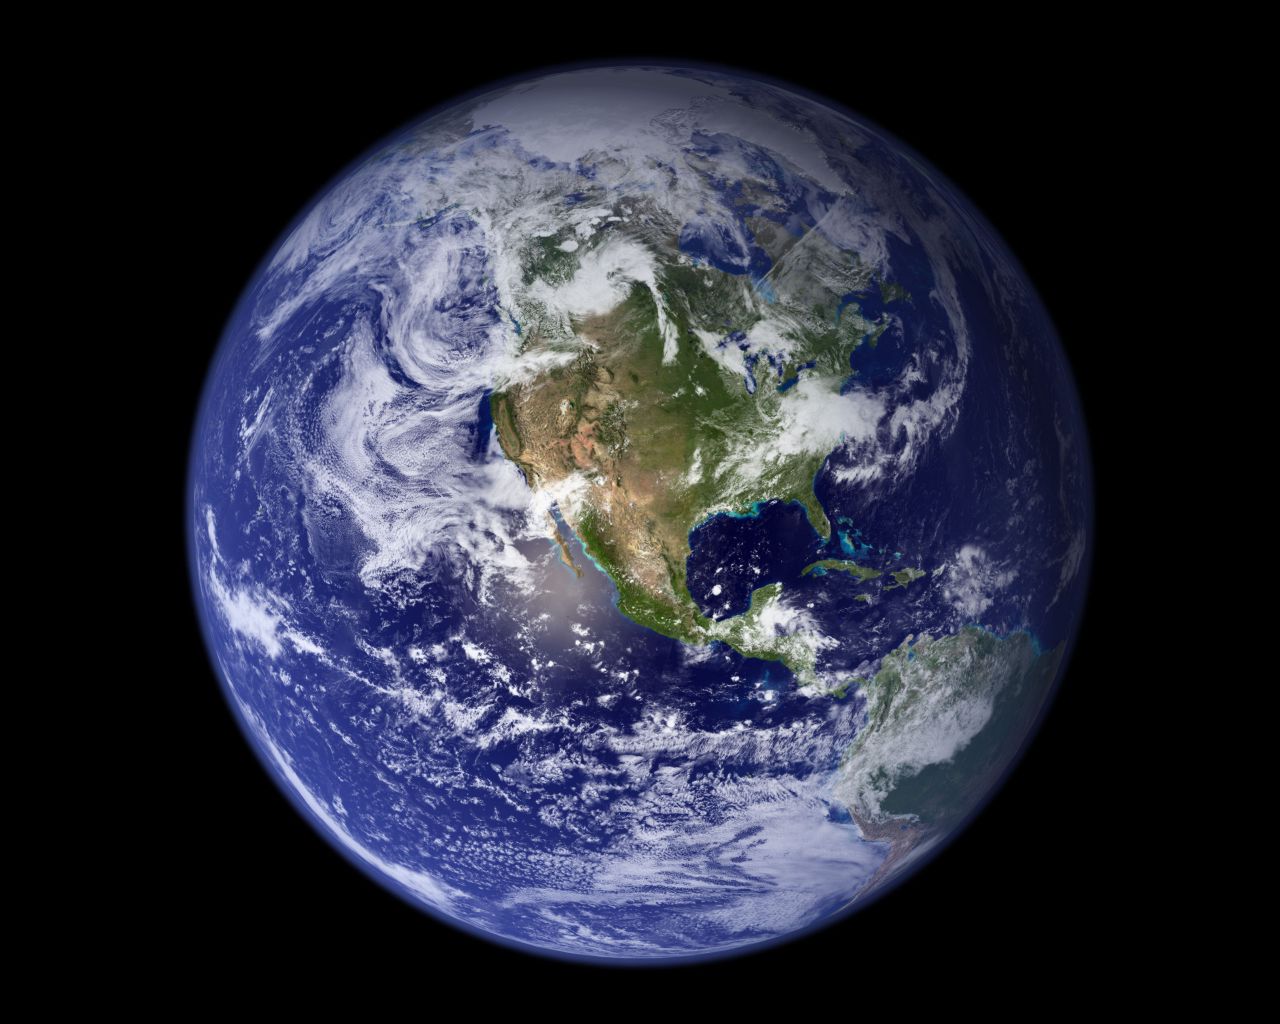 The blue marble